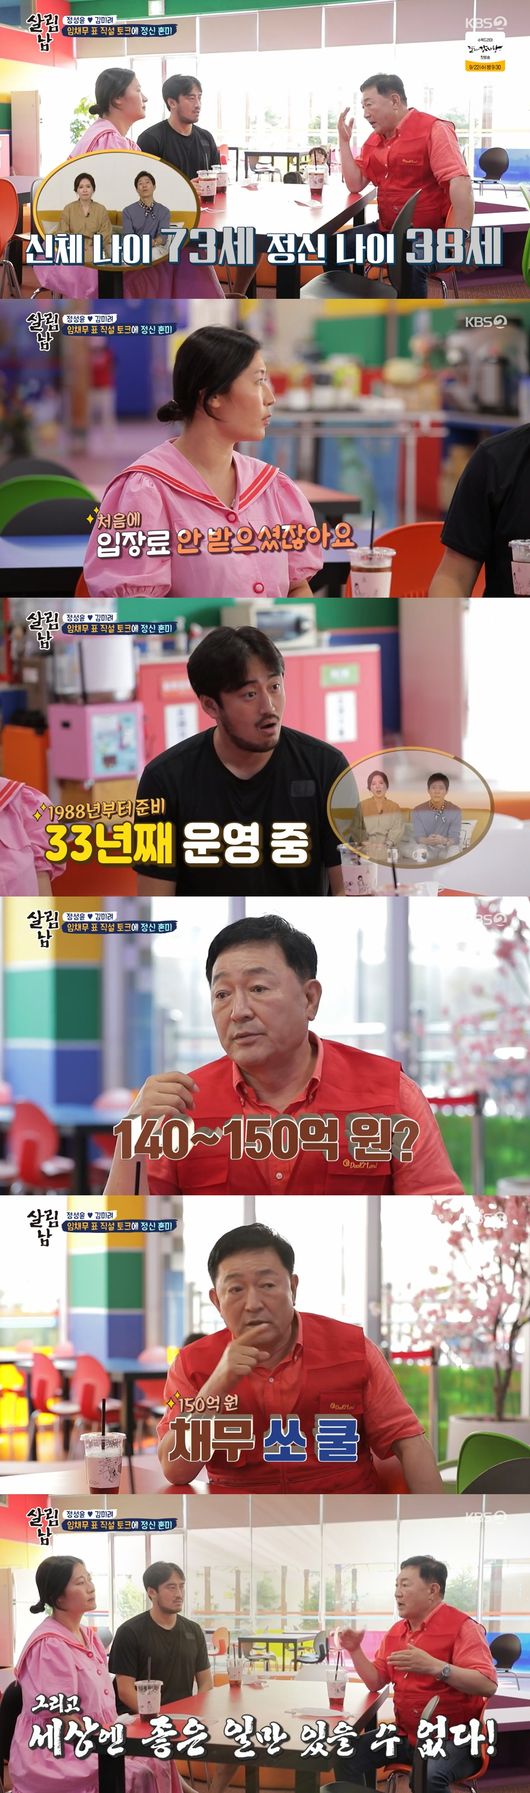 Lim Chae-mu met Jung Sung-Yoon and Kim Mi-Ryeo.On the 4th KBS2TV Salim Nam, Lim Chae-moo attracted attention by bringing out stories about his debt.On this day, Jung Sung-Yoon and Kim Mi-Ryeo visited the duriland of Lim Chae-mu amusement park.Jung Sung-Yoon said he would recognize himself by taking a picture of Drama with his past debt, saying, I am confident that Sung Yoon is here.Jung Sung-Yoon, Kim Mi-Ryeo, met Lim Chae-moo, who saw Kim Mi-Ryeo and said hello immediately; Kim Mi-Ryeo said, Do you remember?I was not the main character. I have been a hero for 50 years, and I often have a bad memory.The Jung Sung-Yoon, Kim Mi-Ryeo and his wife spoke with Lim Chae-mu, who asked, Ive heard you didnt even get the admission fee before.So I heard a fool saying, Im happy to see children playing, he said. Its 30 years old and its the same.Lim said, I think I have 14 billion won and 15 billion won to pay back in the future.Lim Chae-mu said, I have too much debt to have a small card limit and no loans.I also sold two apartments in Yeouido for a quick sale; there is a shower room in the retroom next to me; I lived with two military beds, Lim said.I had a romantic relationship with my employees in the evening and I and my wife drank canned beer, so I lived in the restaurant for a year, he said.The rainbow is blooming after the showers, Lim said. I have never been up since 5 am because I have worked hard. I still wake up from 2 or 3 am and plan.Looking at the teacher, I thought mental was rotten, stimulated, Jung Sung-Yoon said.